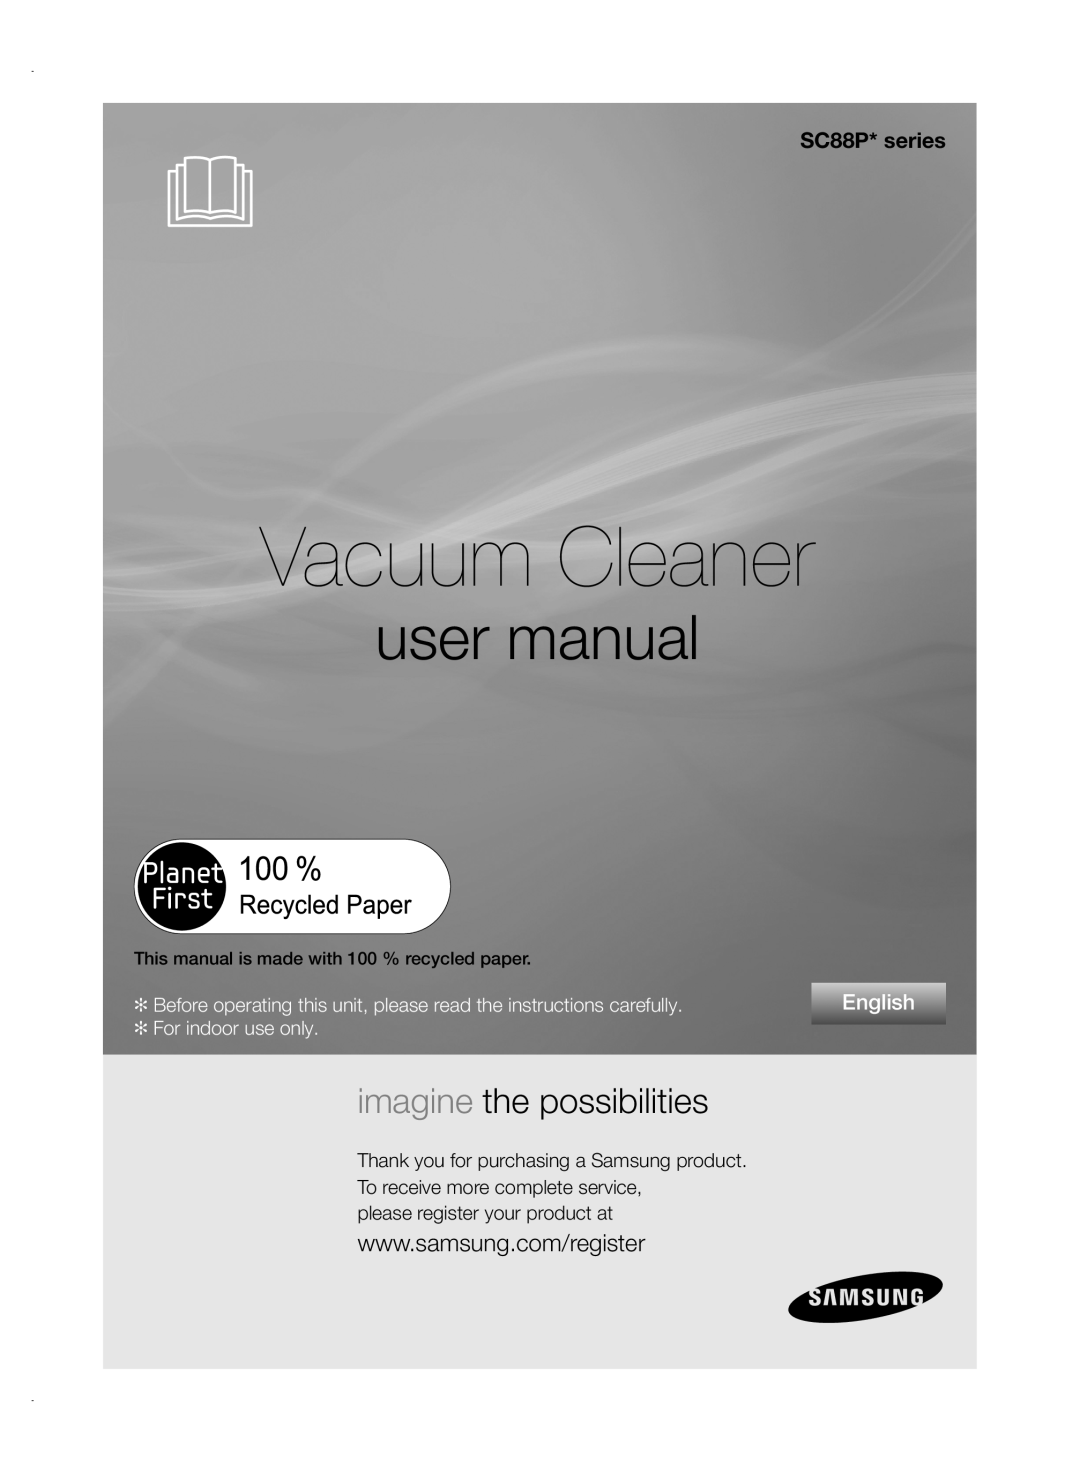 Samsung VCC88P0H1B user manual Vacuum Cleaner, imagine the possibilities, SC88P* series, English, For indoor use only 